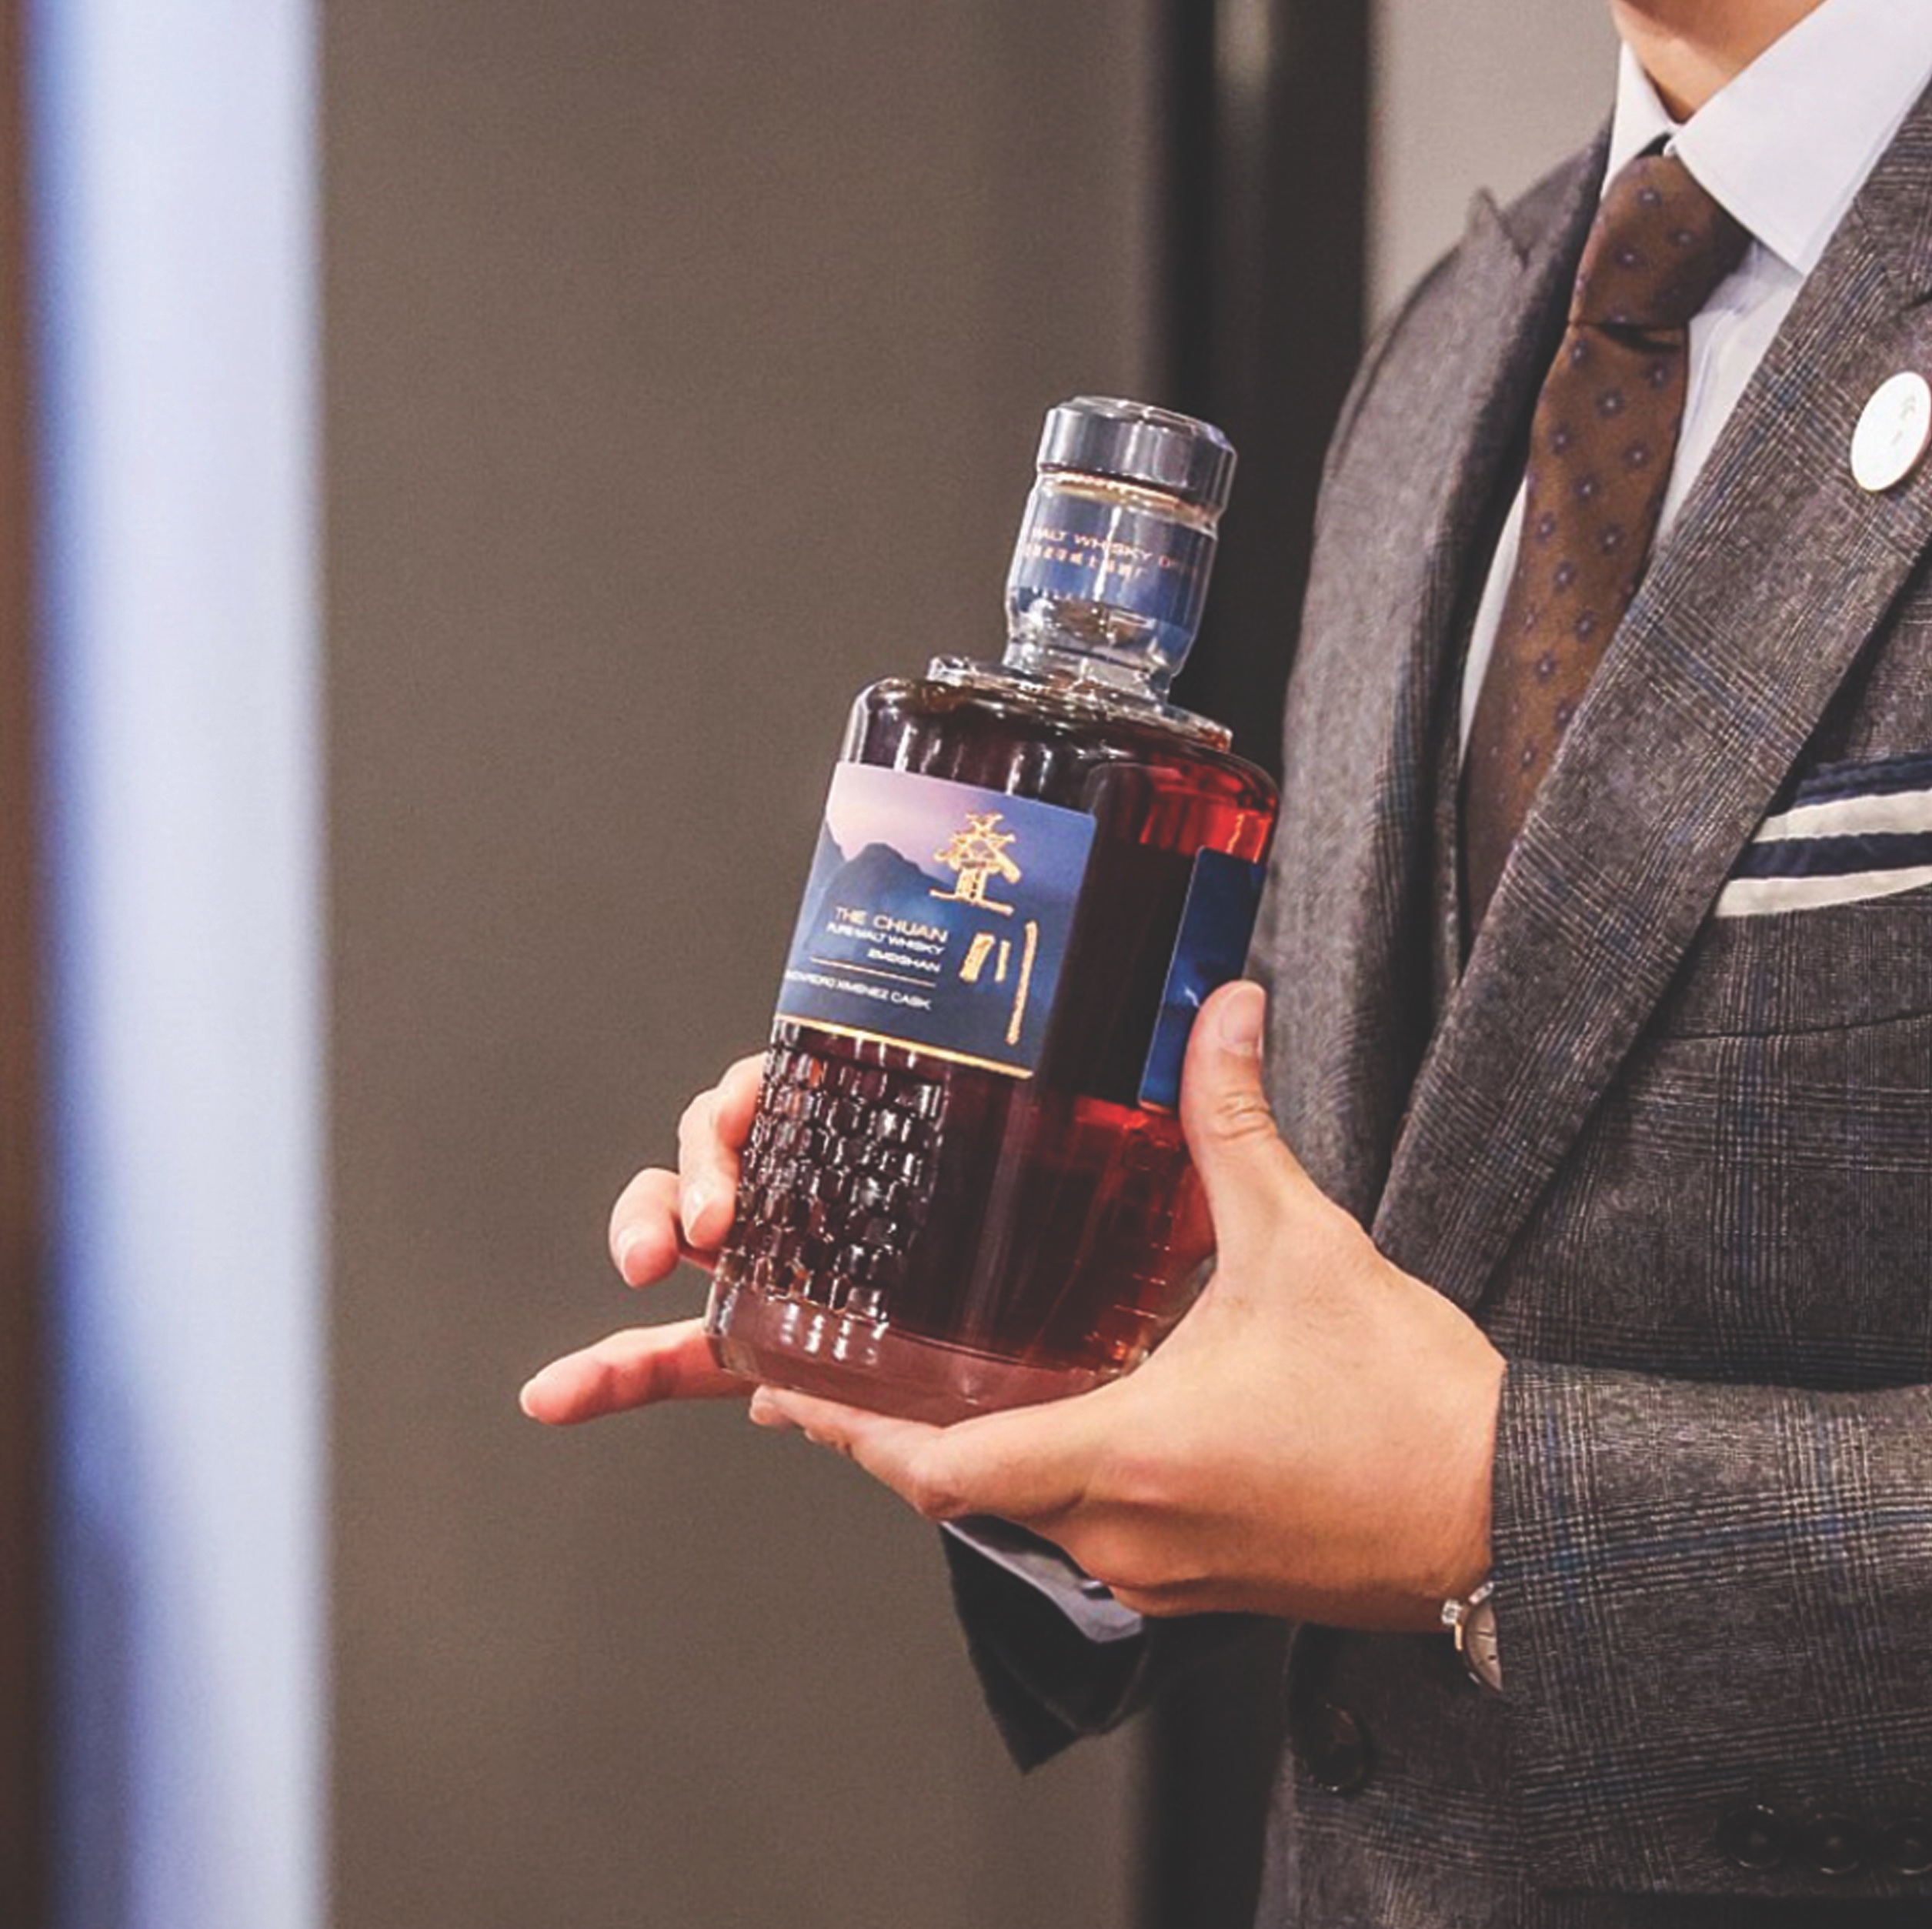 Pernod Ricard Unveils Packaging Design for China's First Prestige Malt Whisky, The Chuan